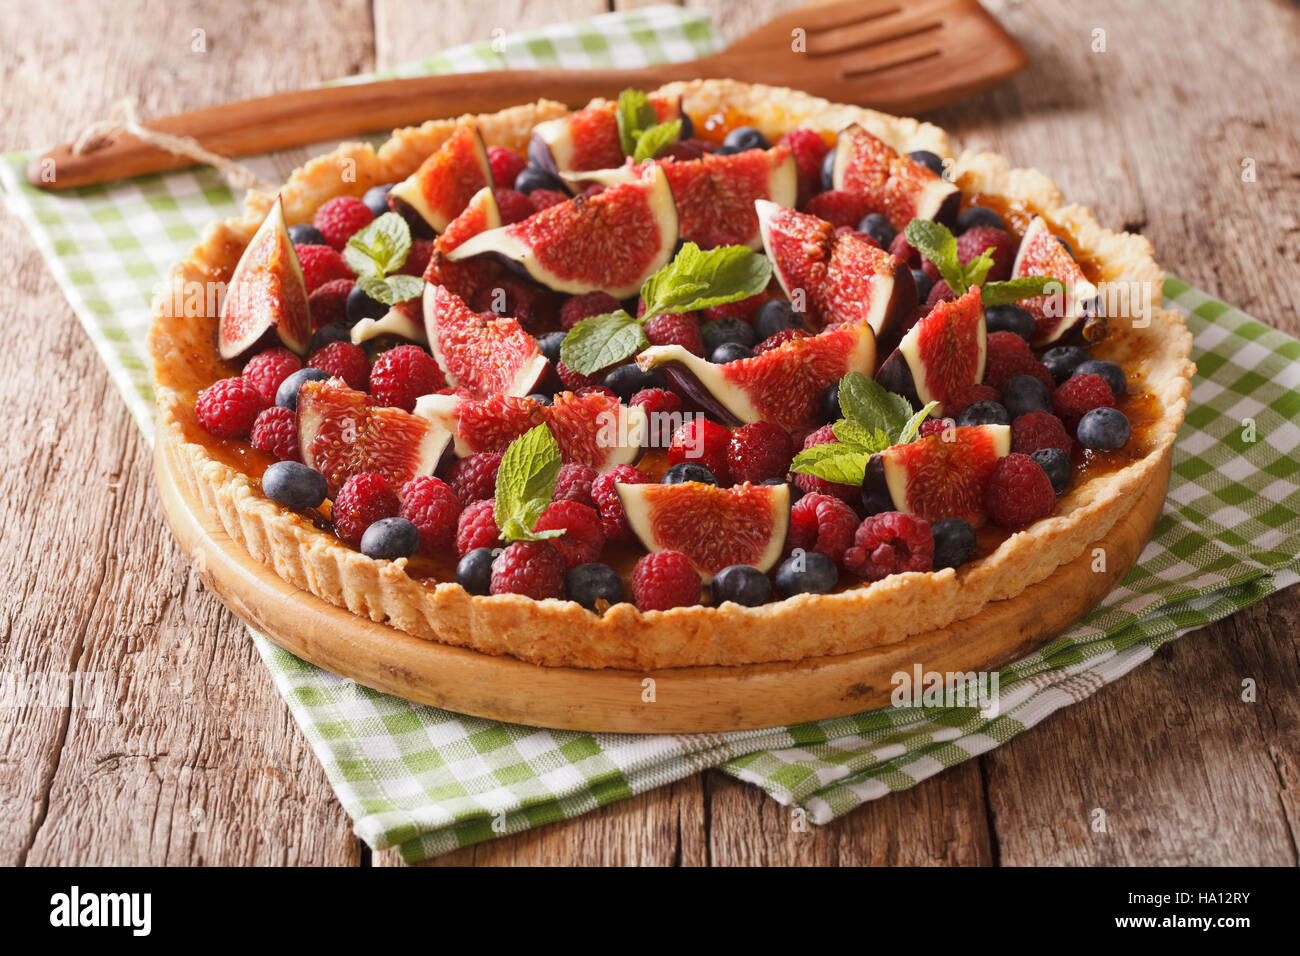 homemade tart with fresh fruits and berries decorated with mint close up on the table. horizontal Stock Photo